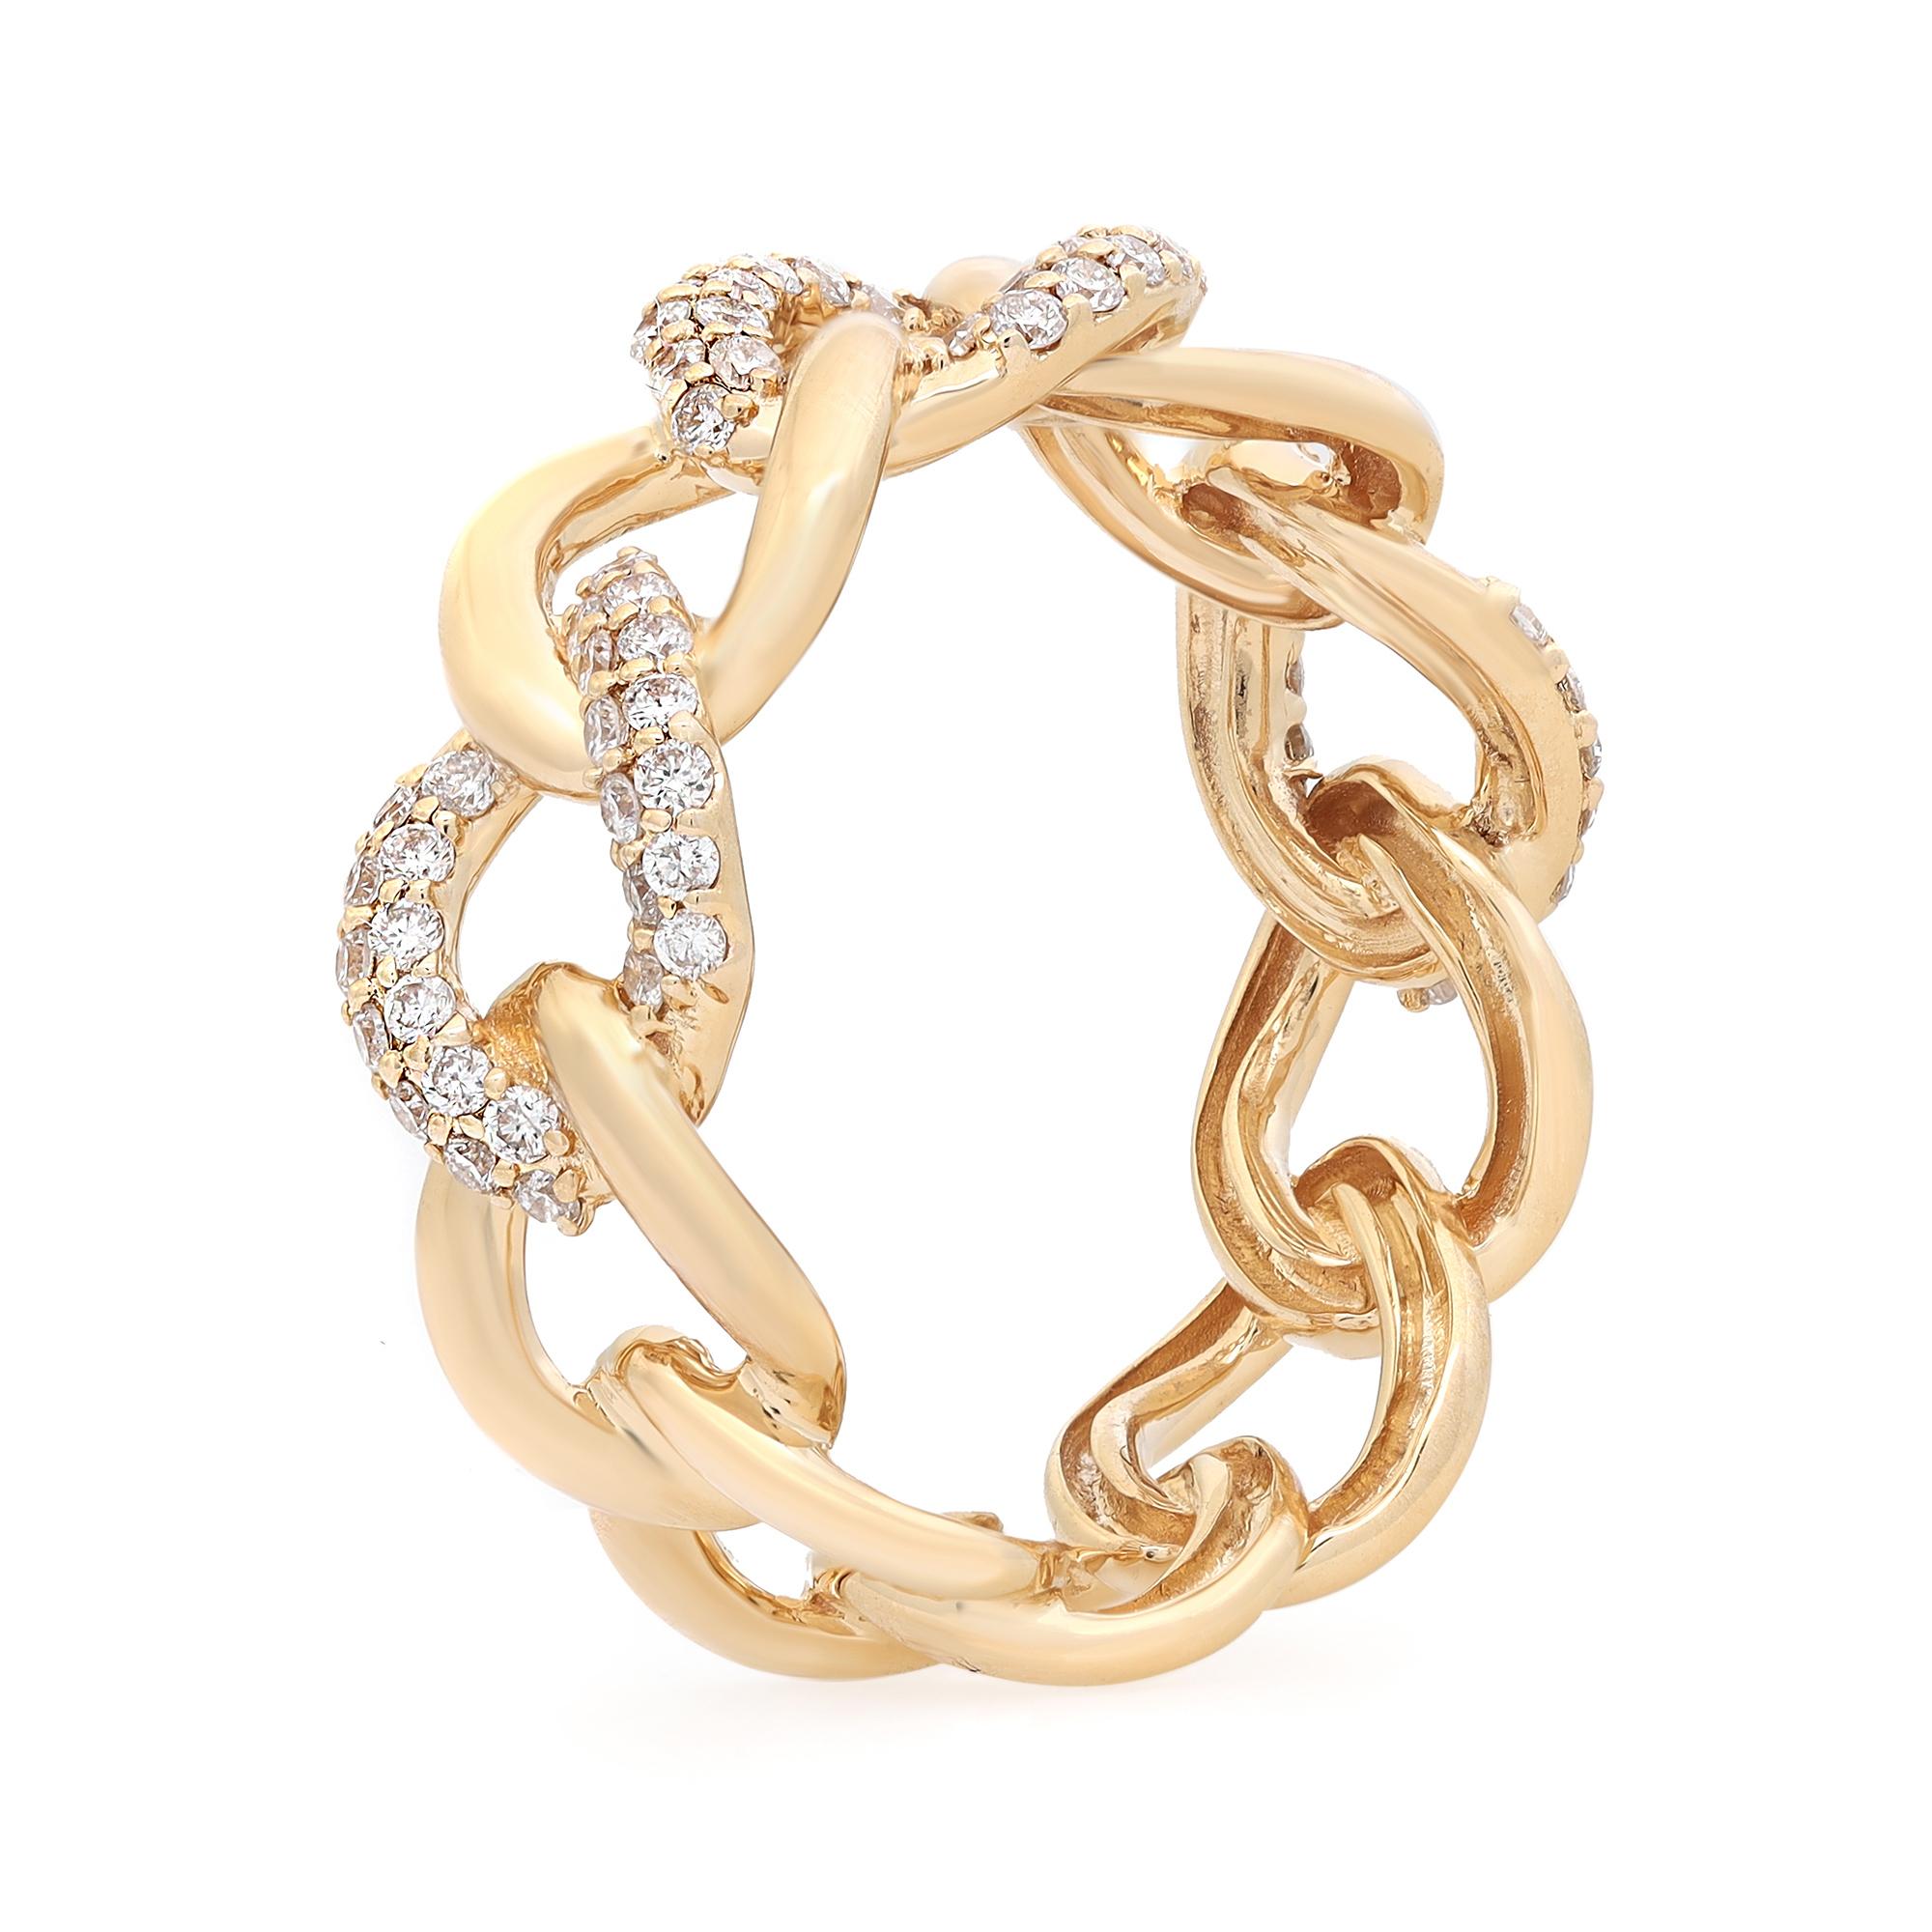 This classic yet elegant chain link ring band features pave set round brilliant cut diamonds encrusted in three alternate links. Crafted in high polished 18k yellow gold. Total diamond weight: 0.50Cttw. Diamond quality: Color G-H and Clarity VS-SI.